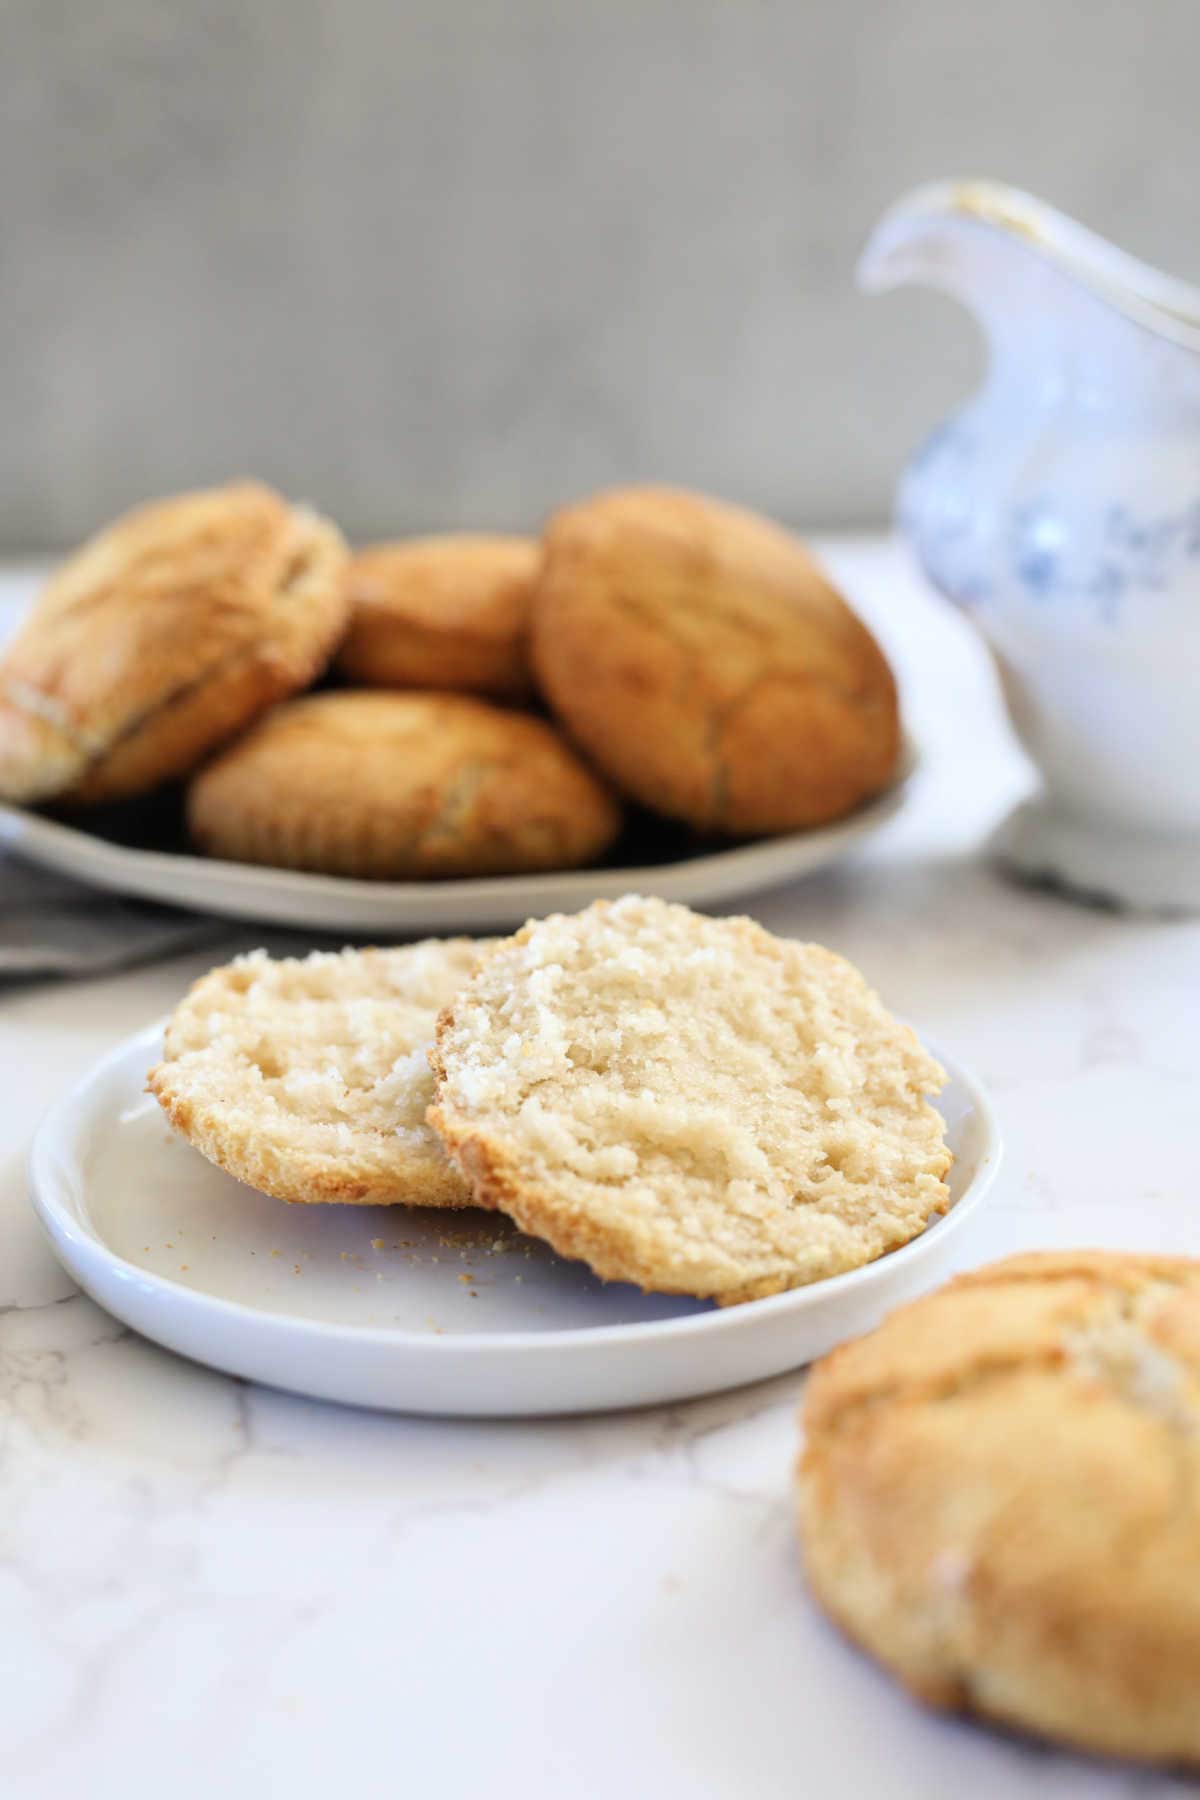 Dairy-free and paleo biscuits on a plate.